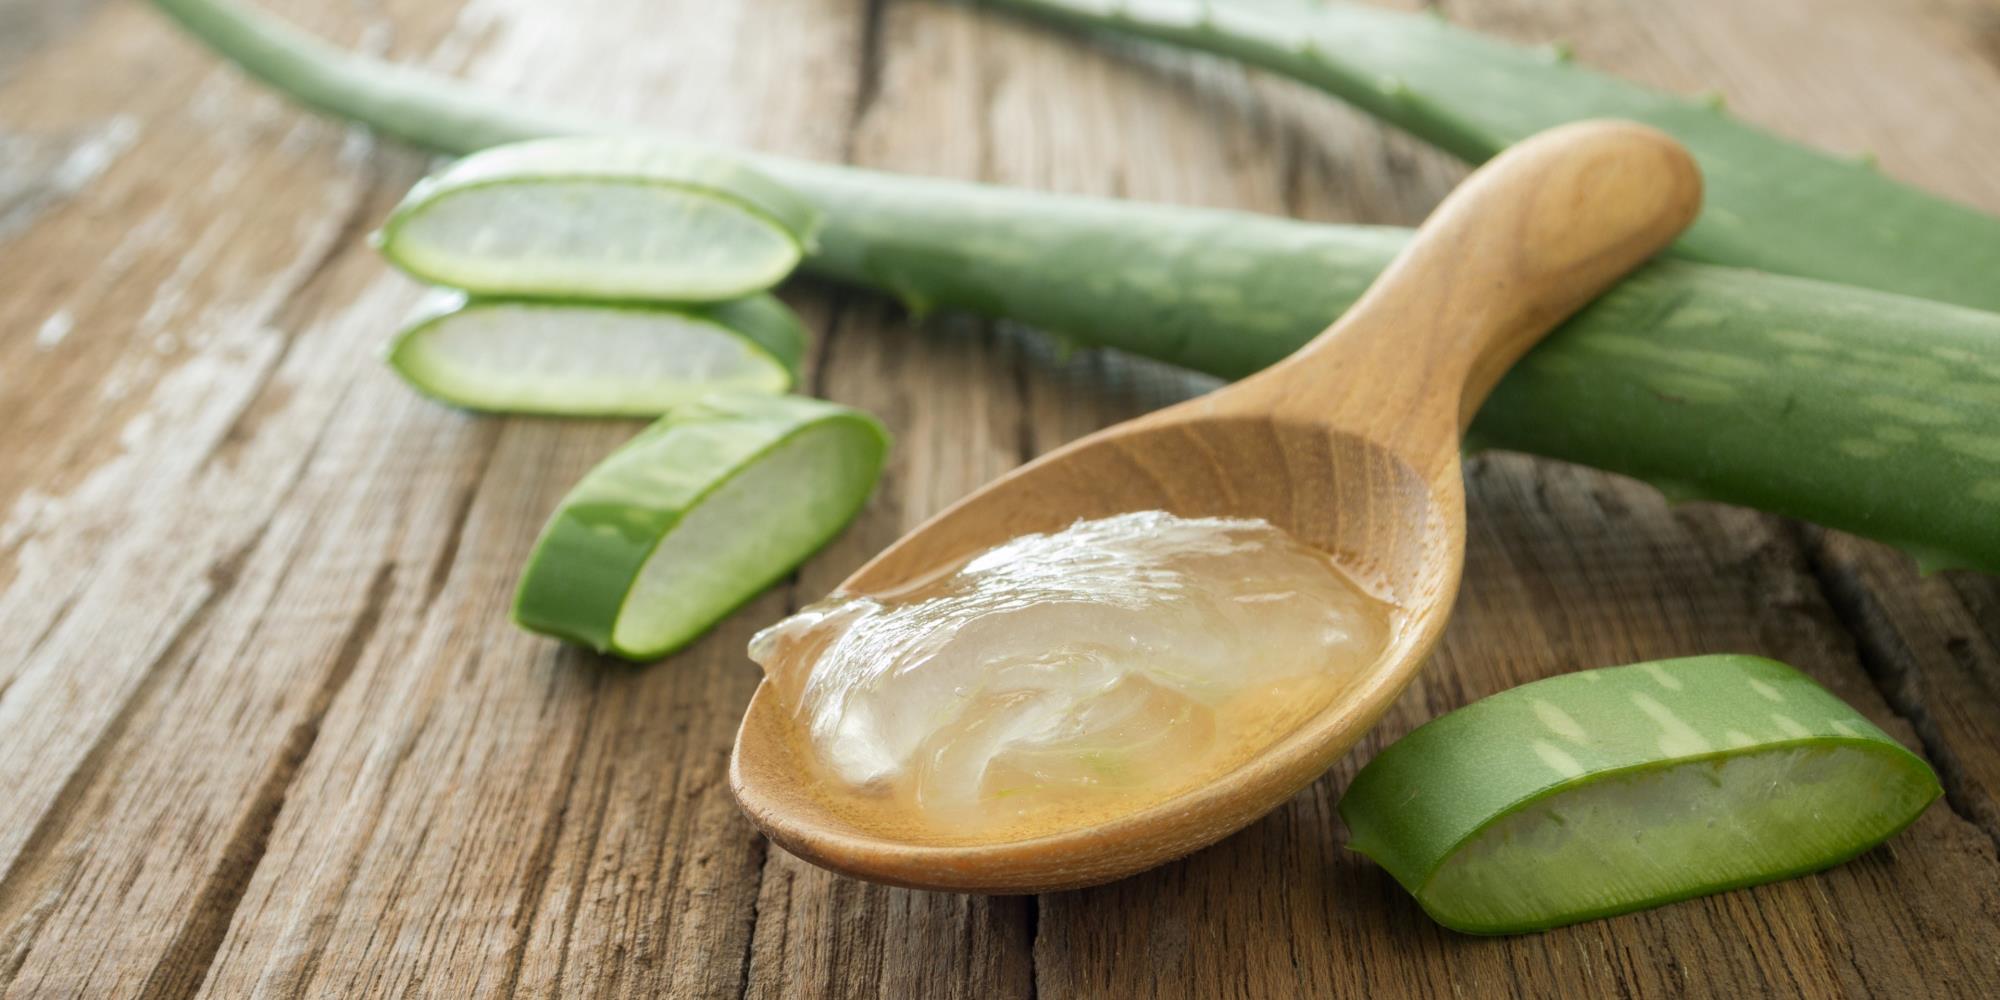 Can Aloe Vera be used for skin injuries and burns?